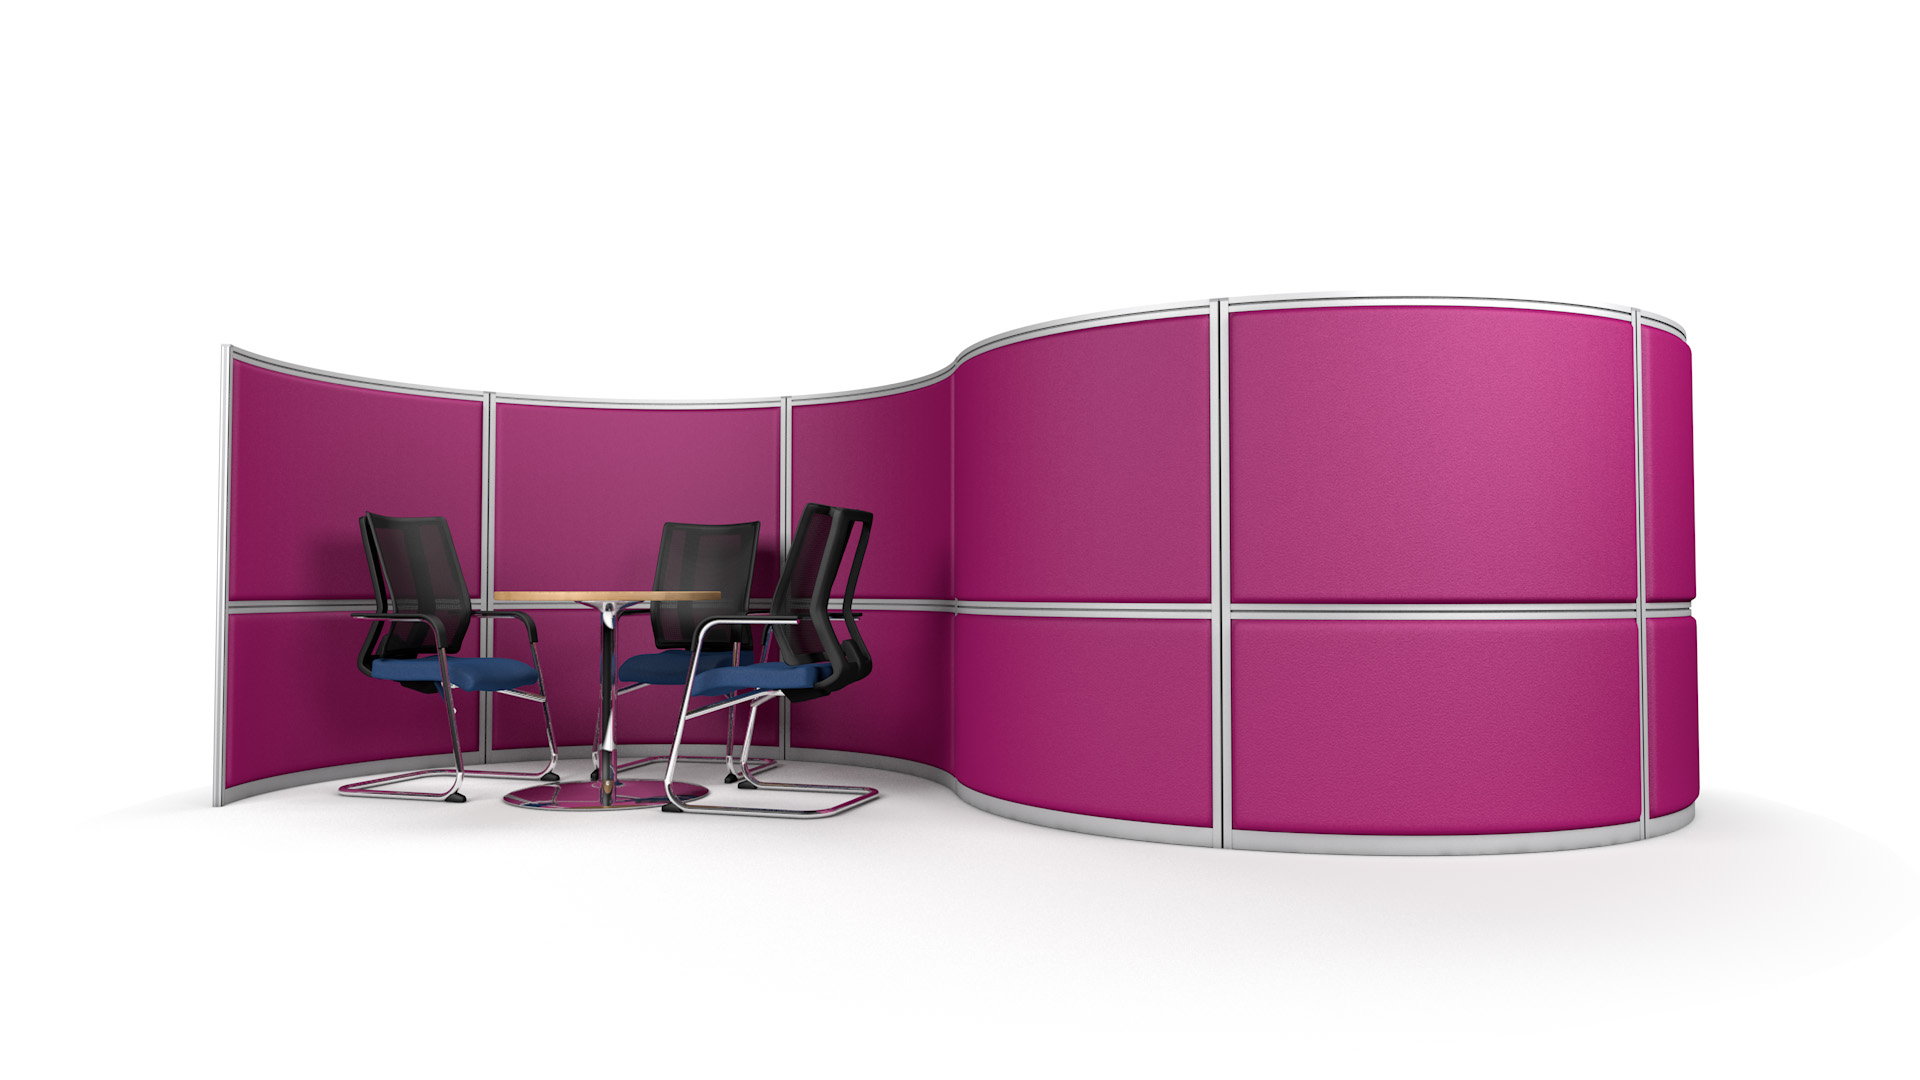 S-Shaped Curved Acoustic Office Screen Wall Includes Two Meeting Booths